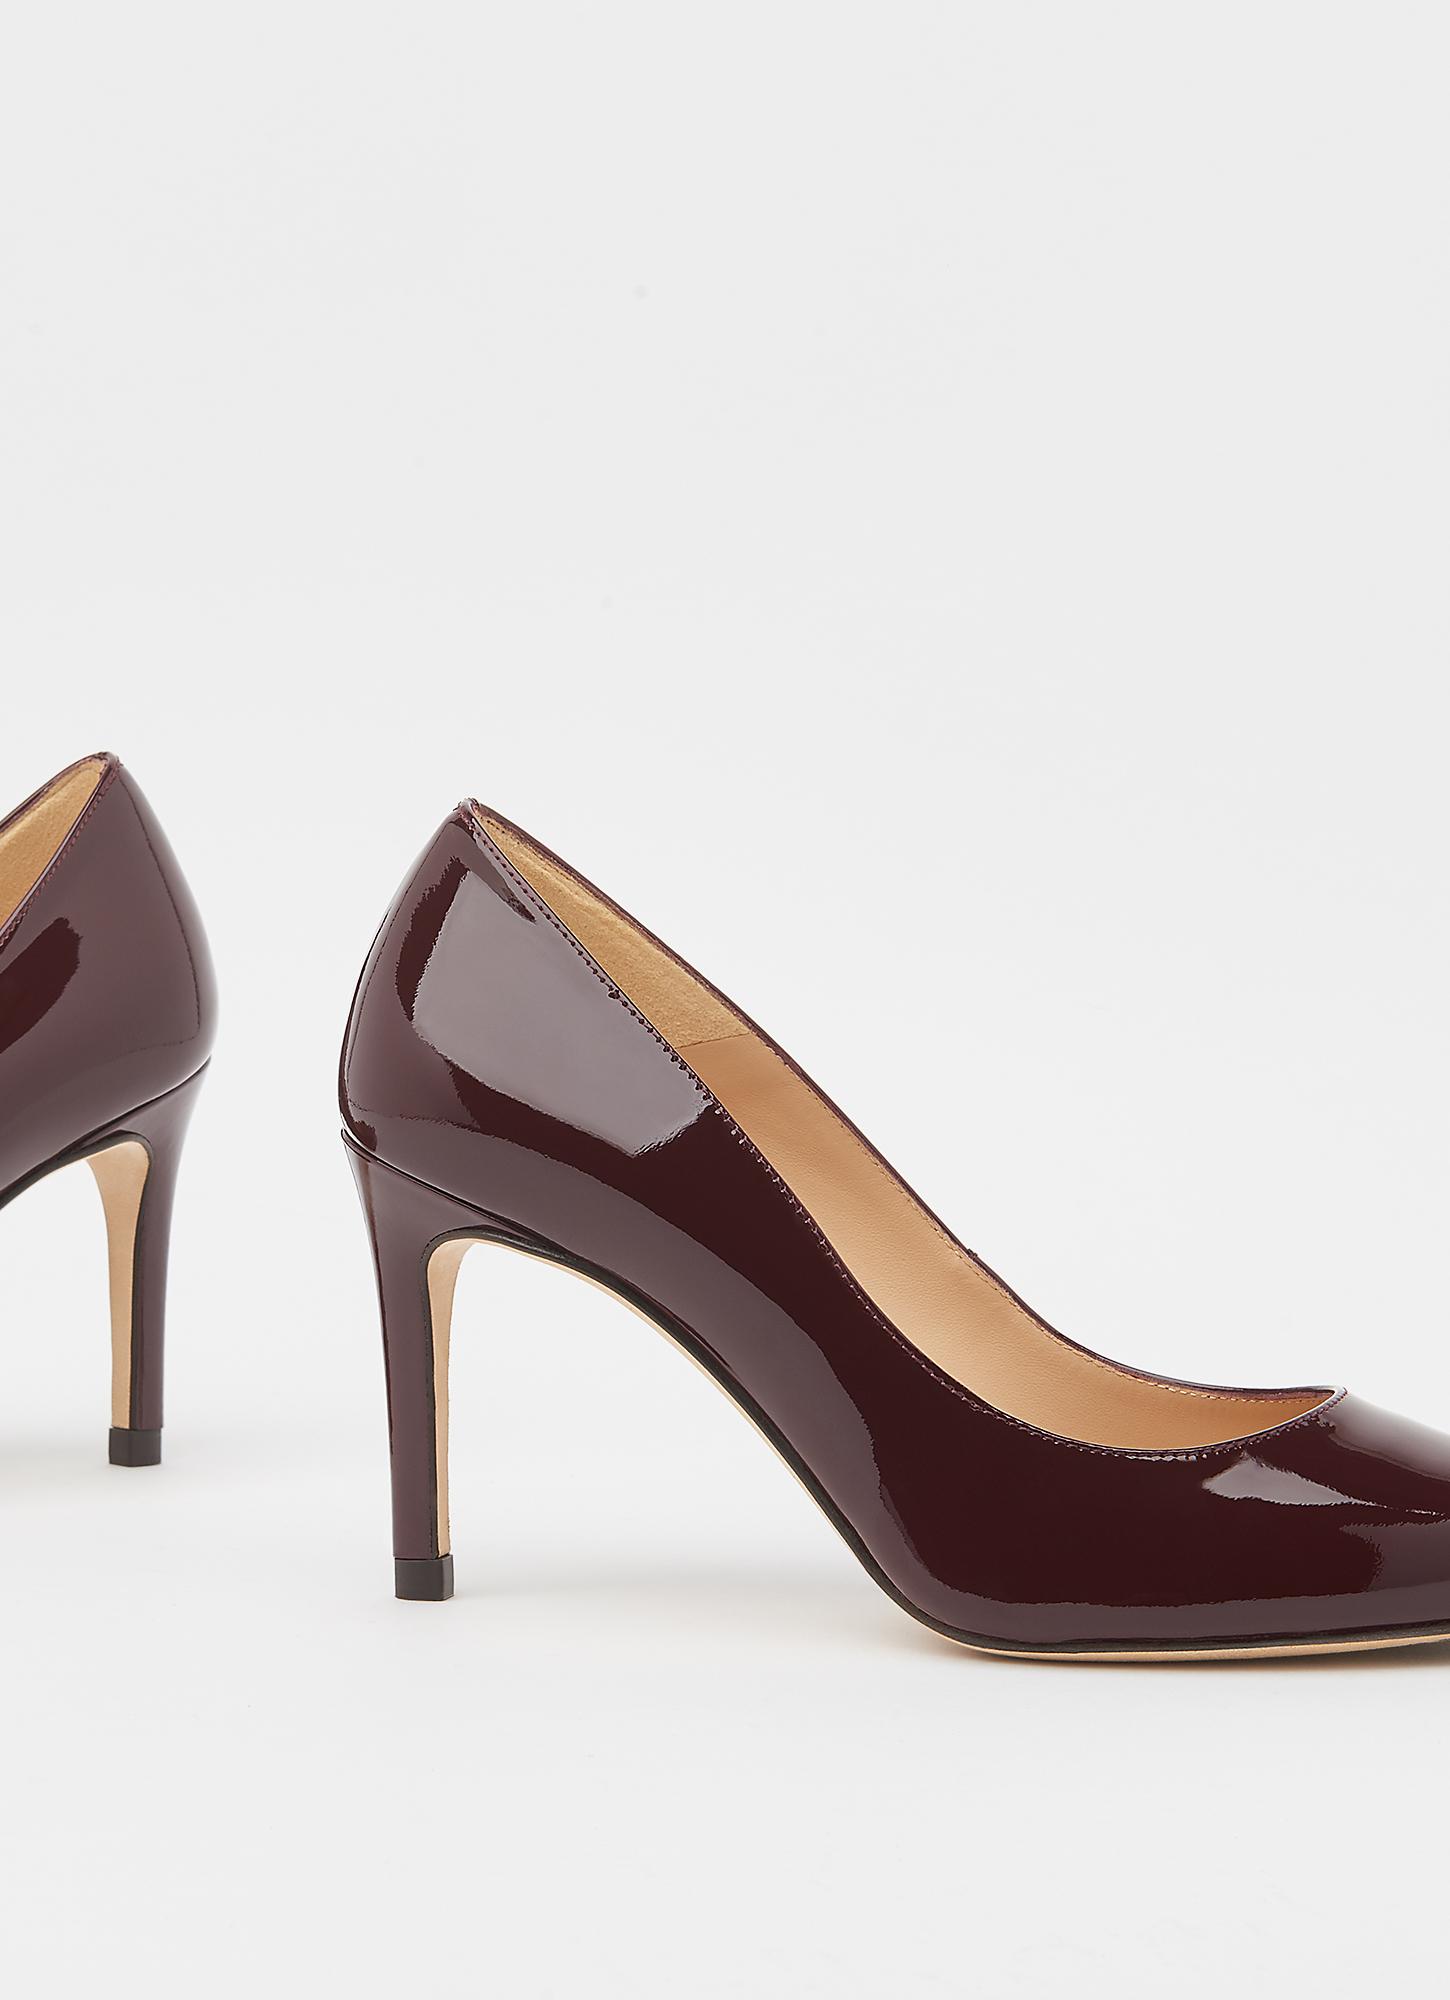 Floret Oxblood Patent Pointed Toe 